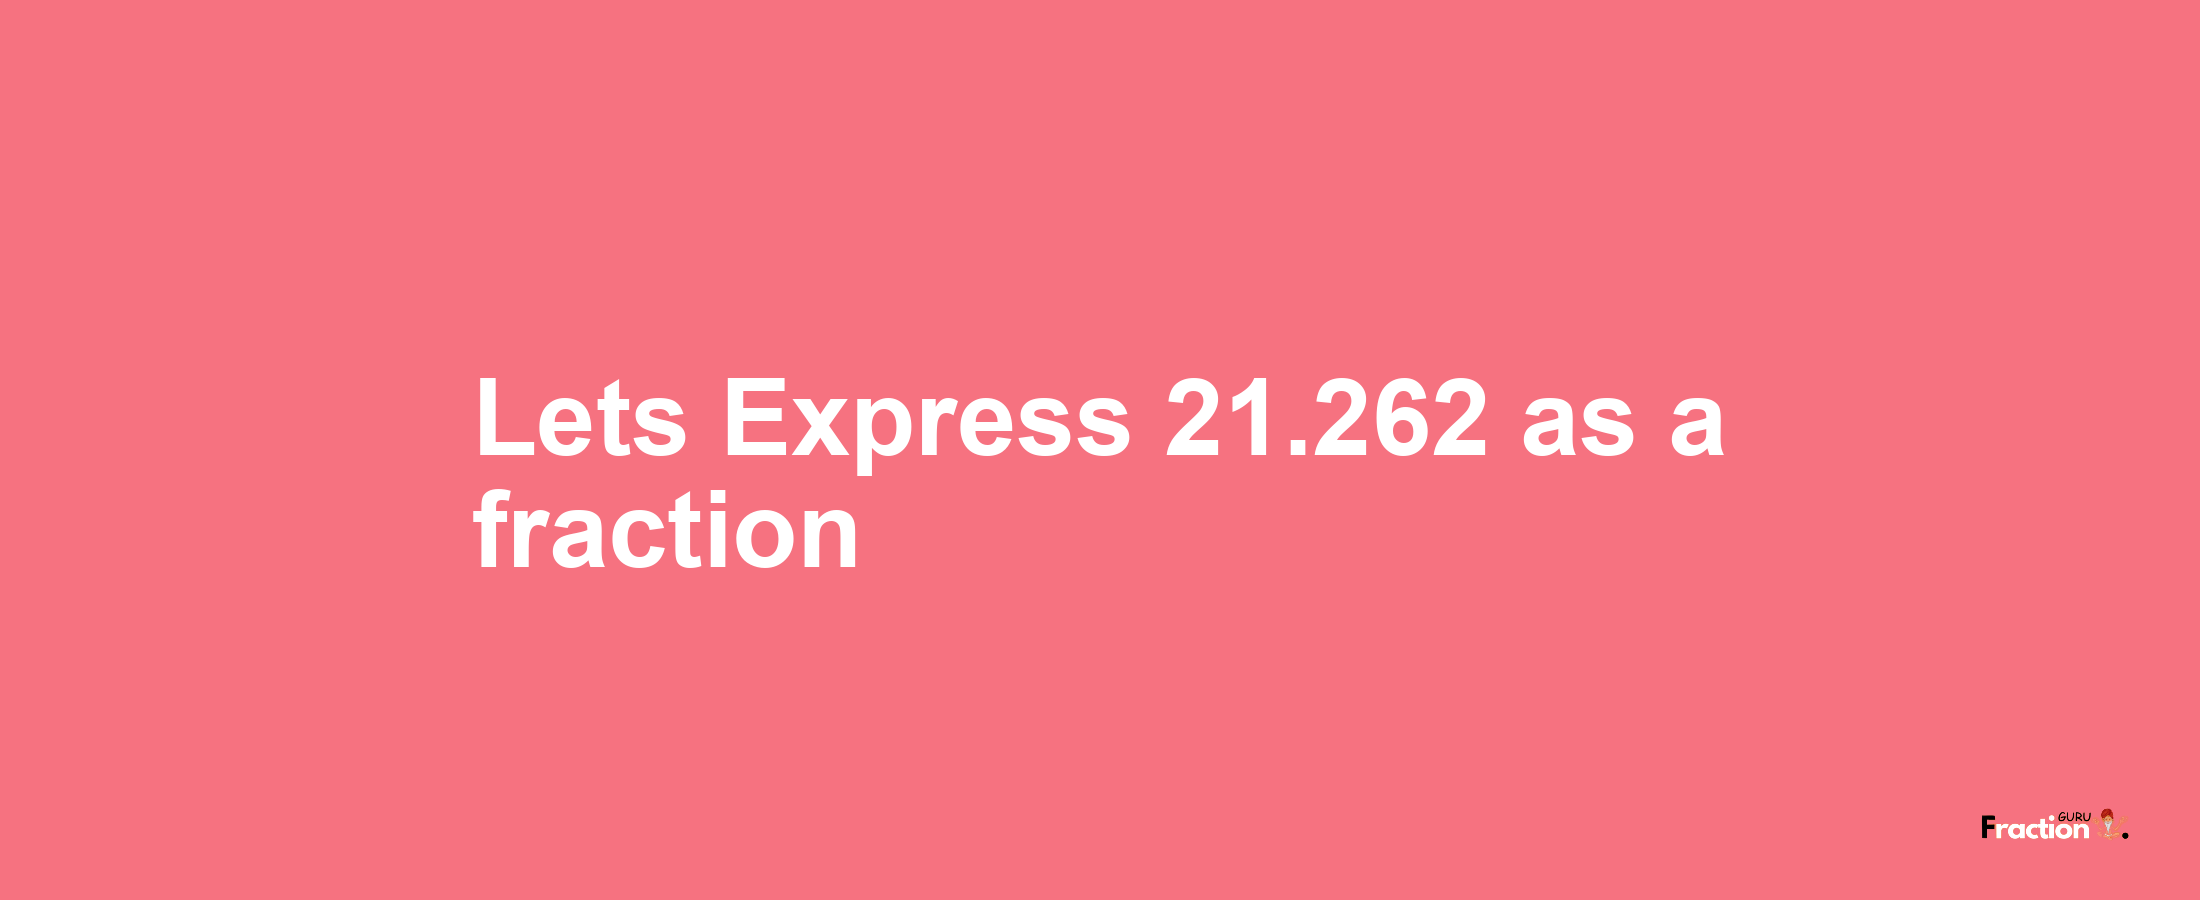 Lets Express 21.262 as afraction